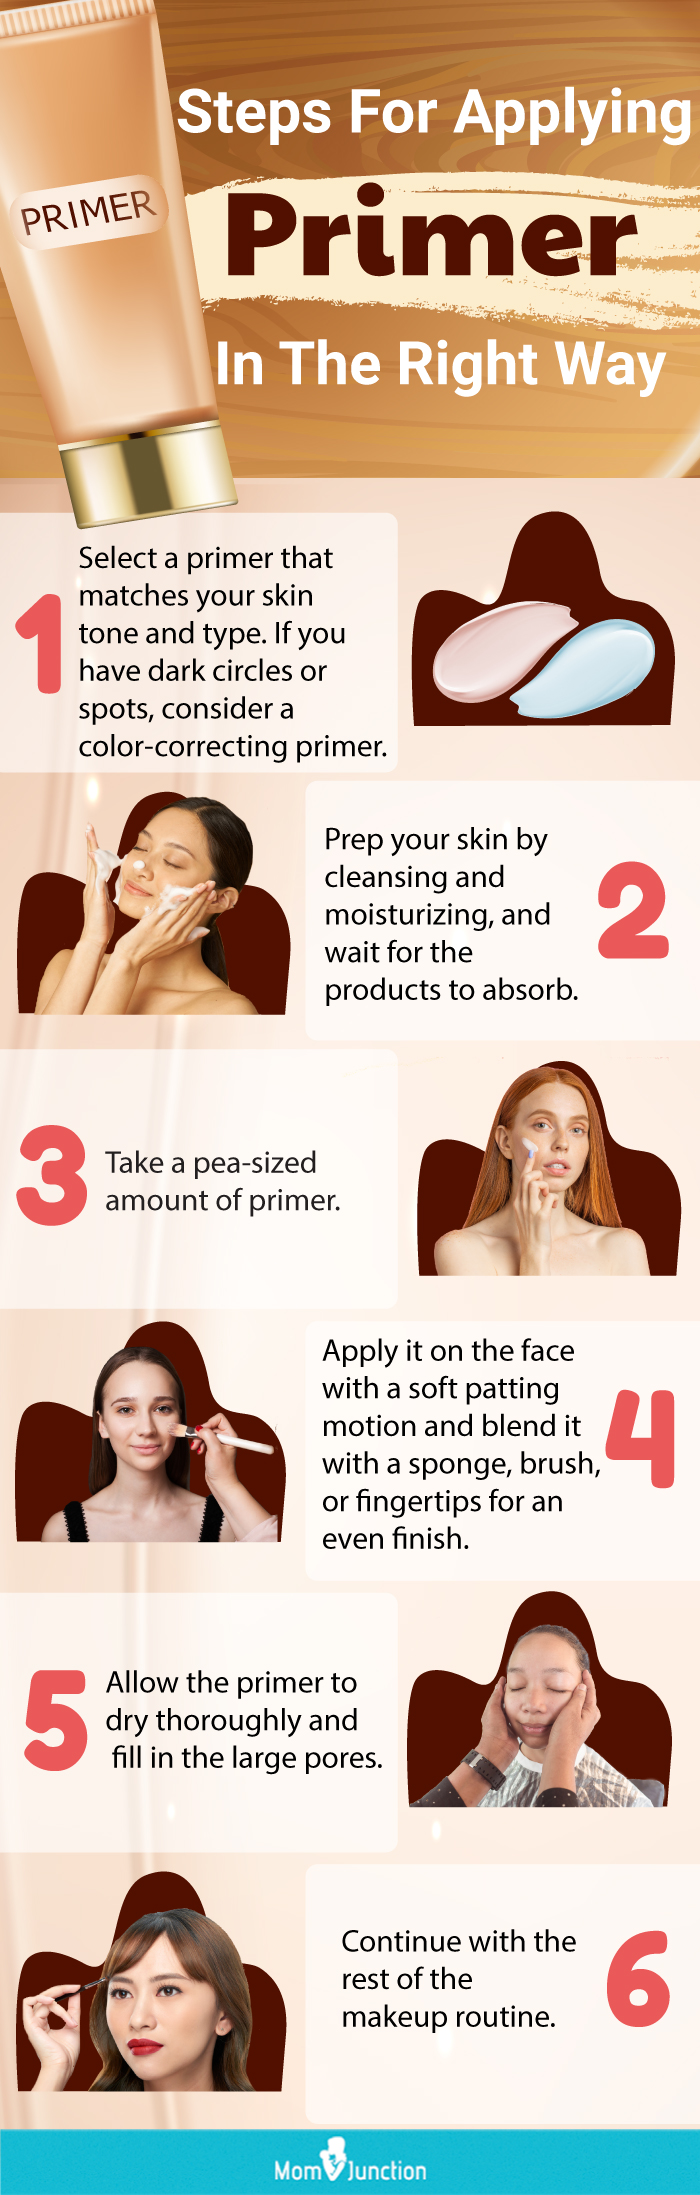 Steps For Applying Primer In The Right Way